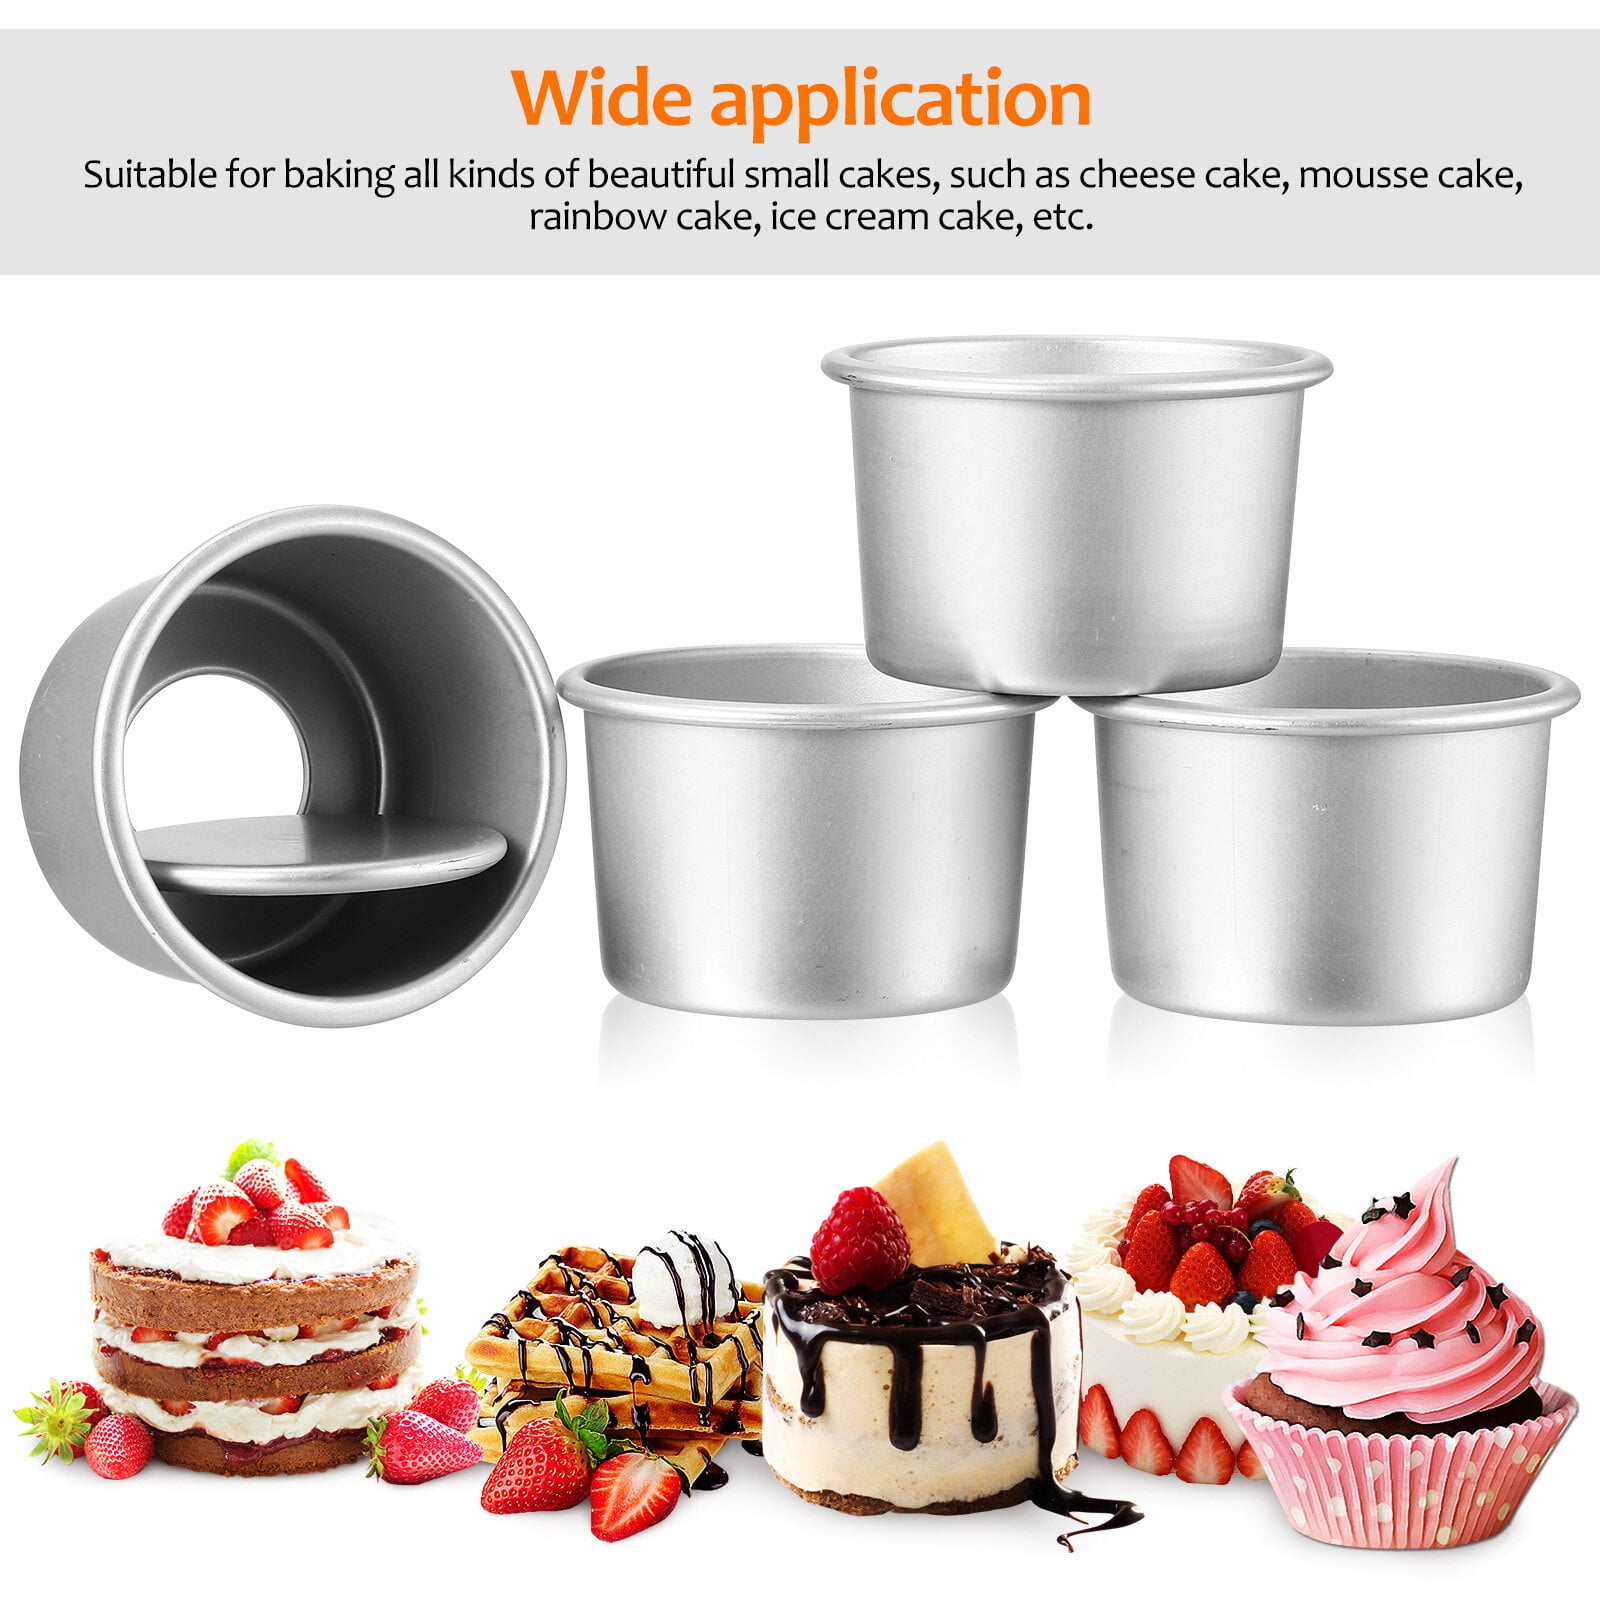 4/6/8 Inch Round Cake Pan Set With Removable Bottom Aluminum Alloy Chiffon Cake  Mold/Mould Set 3 Tier Round Cakes Tins C019